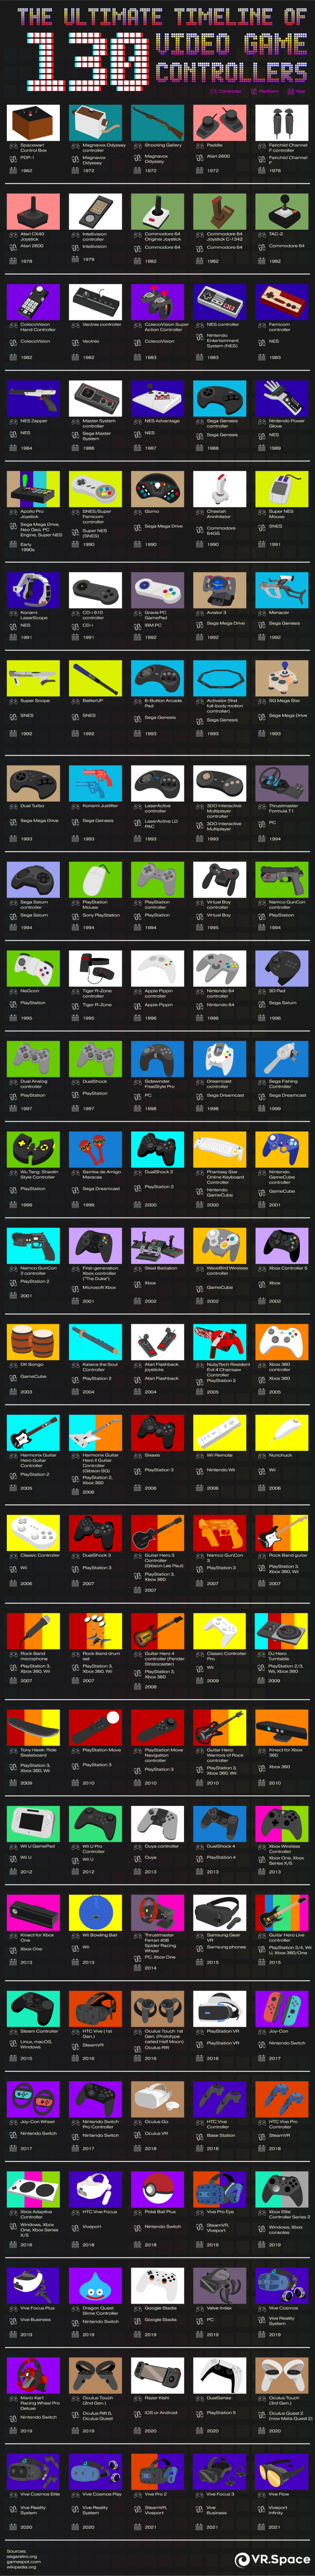 timeline-video-game-controllers